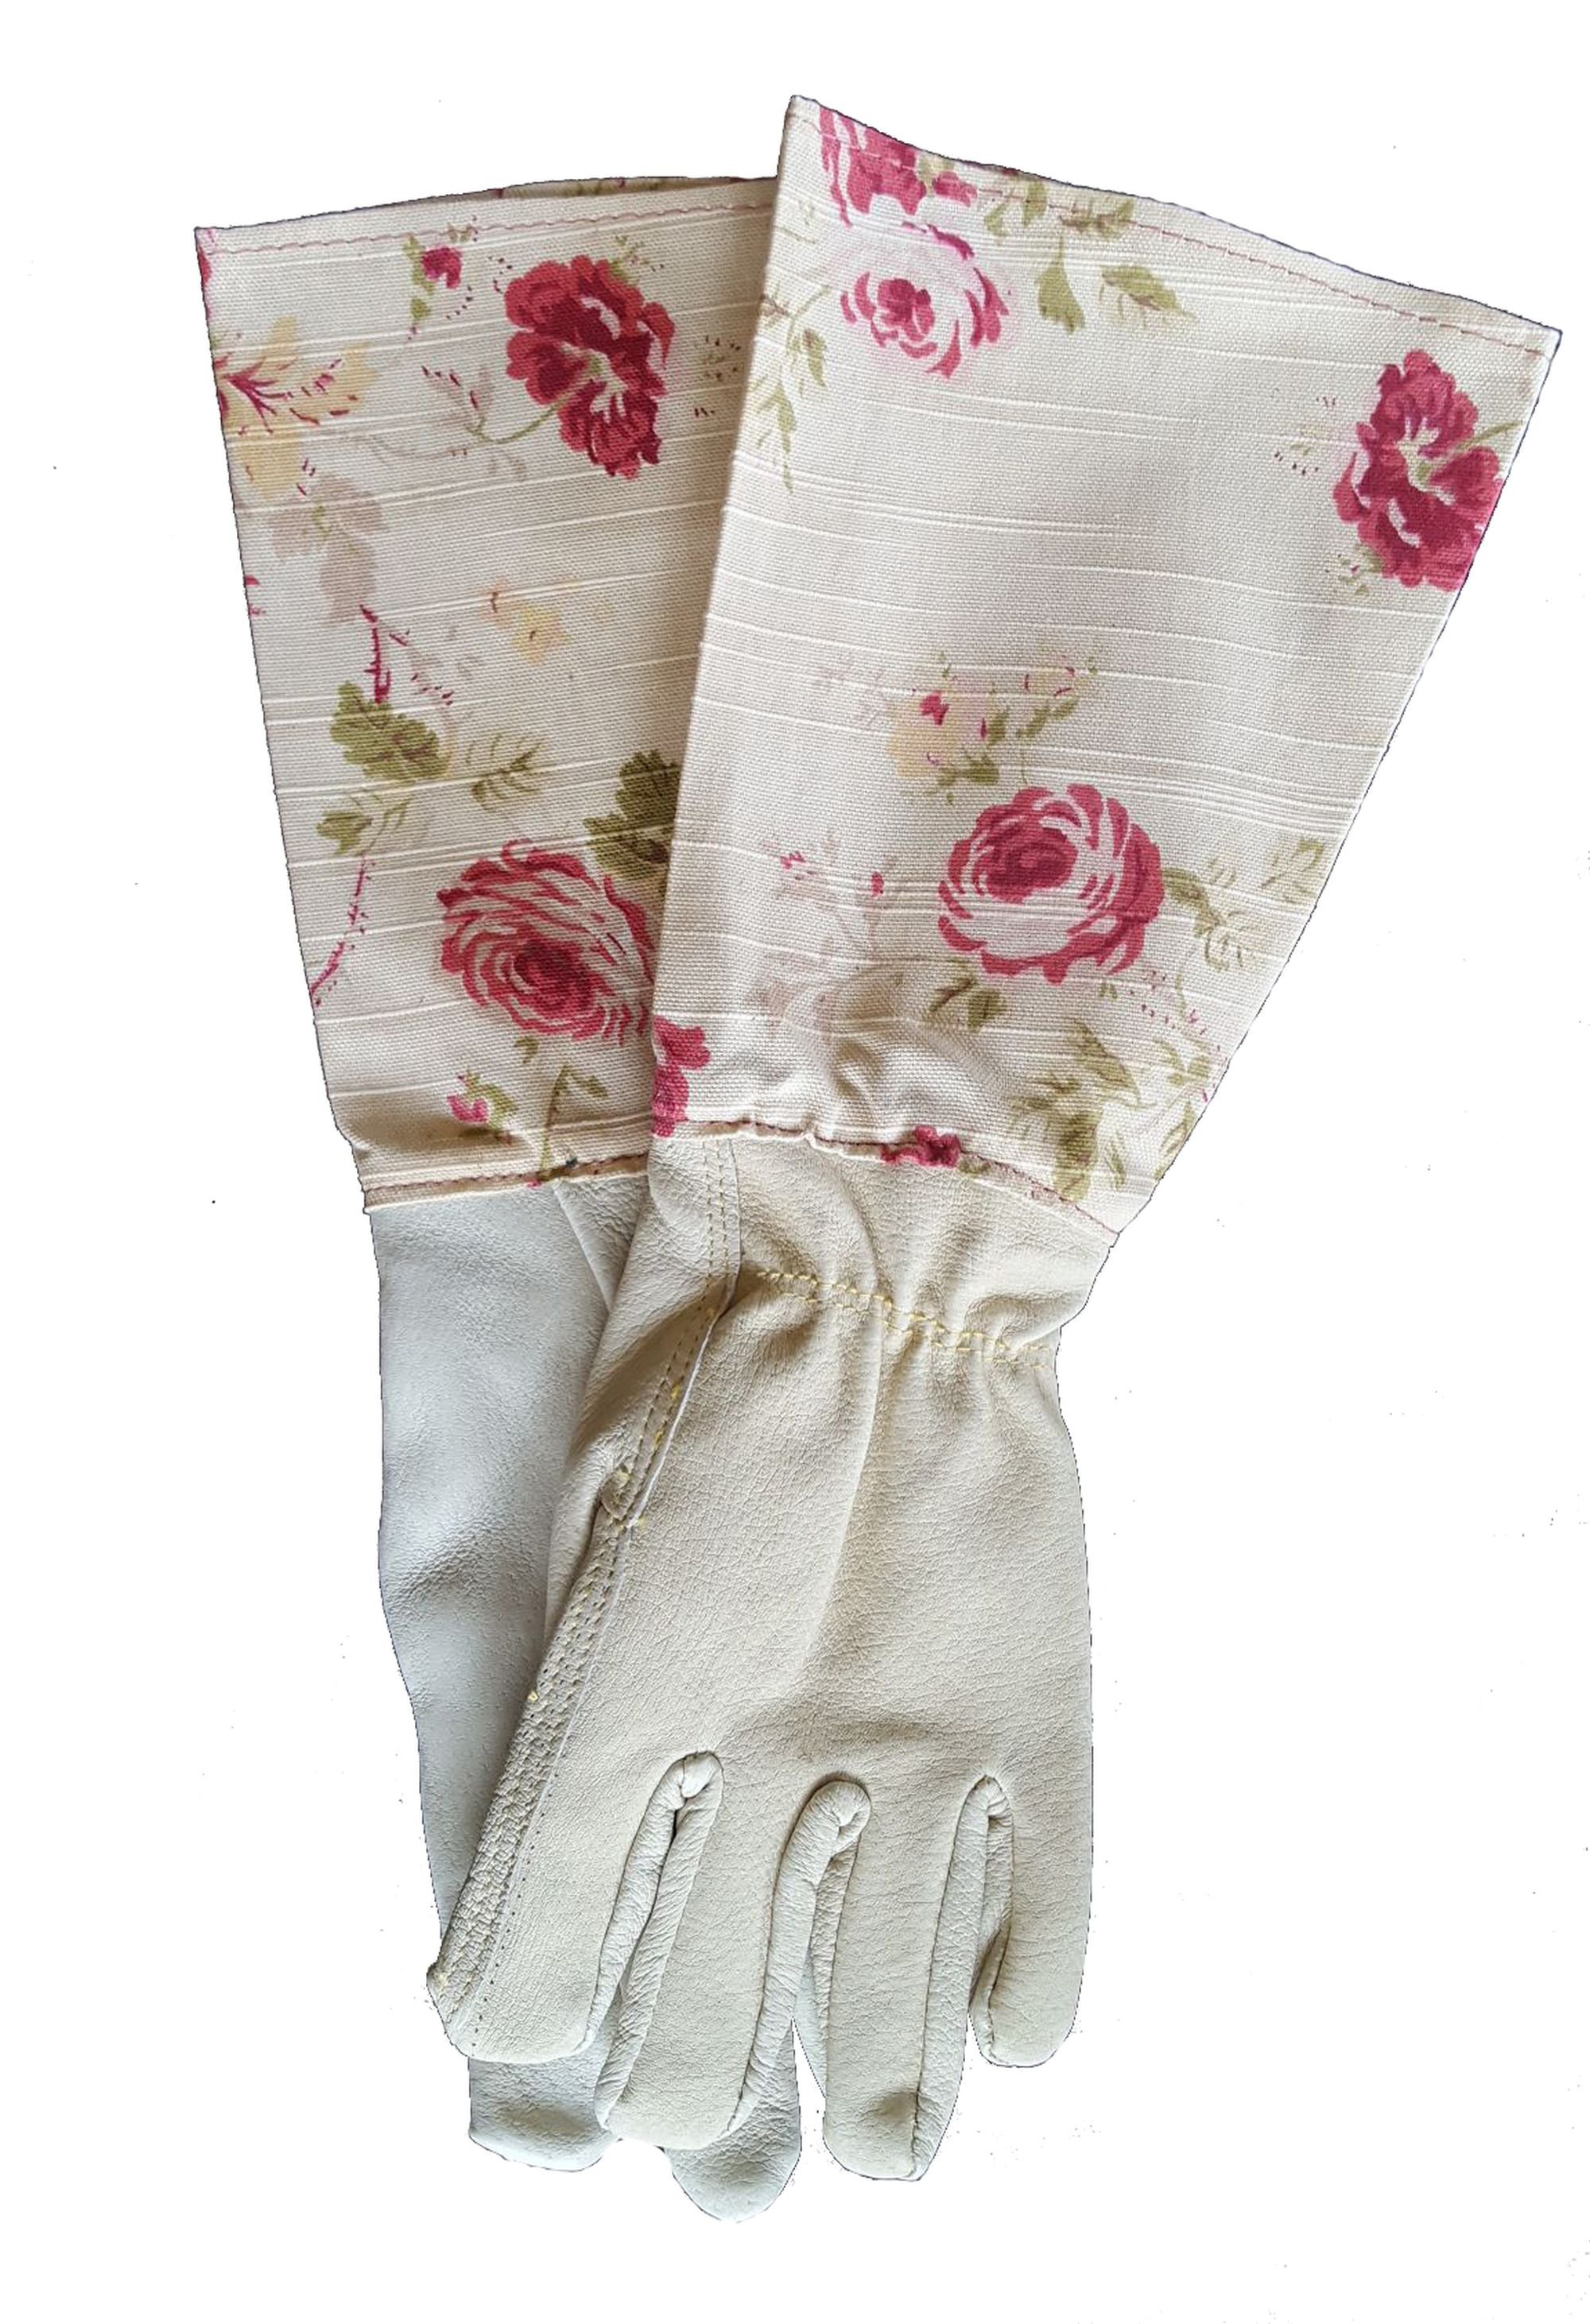 9.ANNABEL JAMES Gardening gauntlets English rose linen and leather €35.16, 